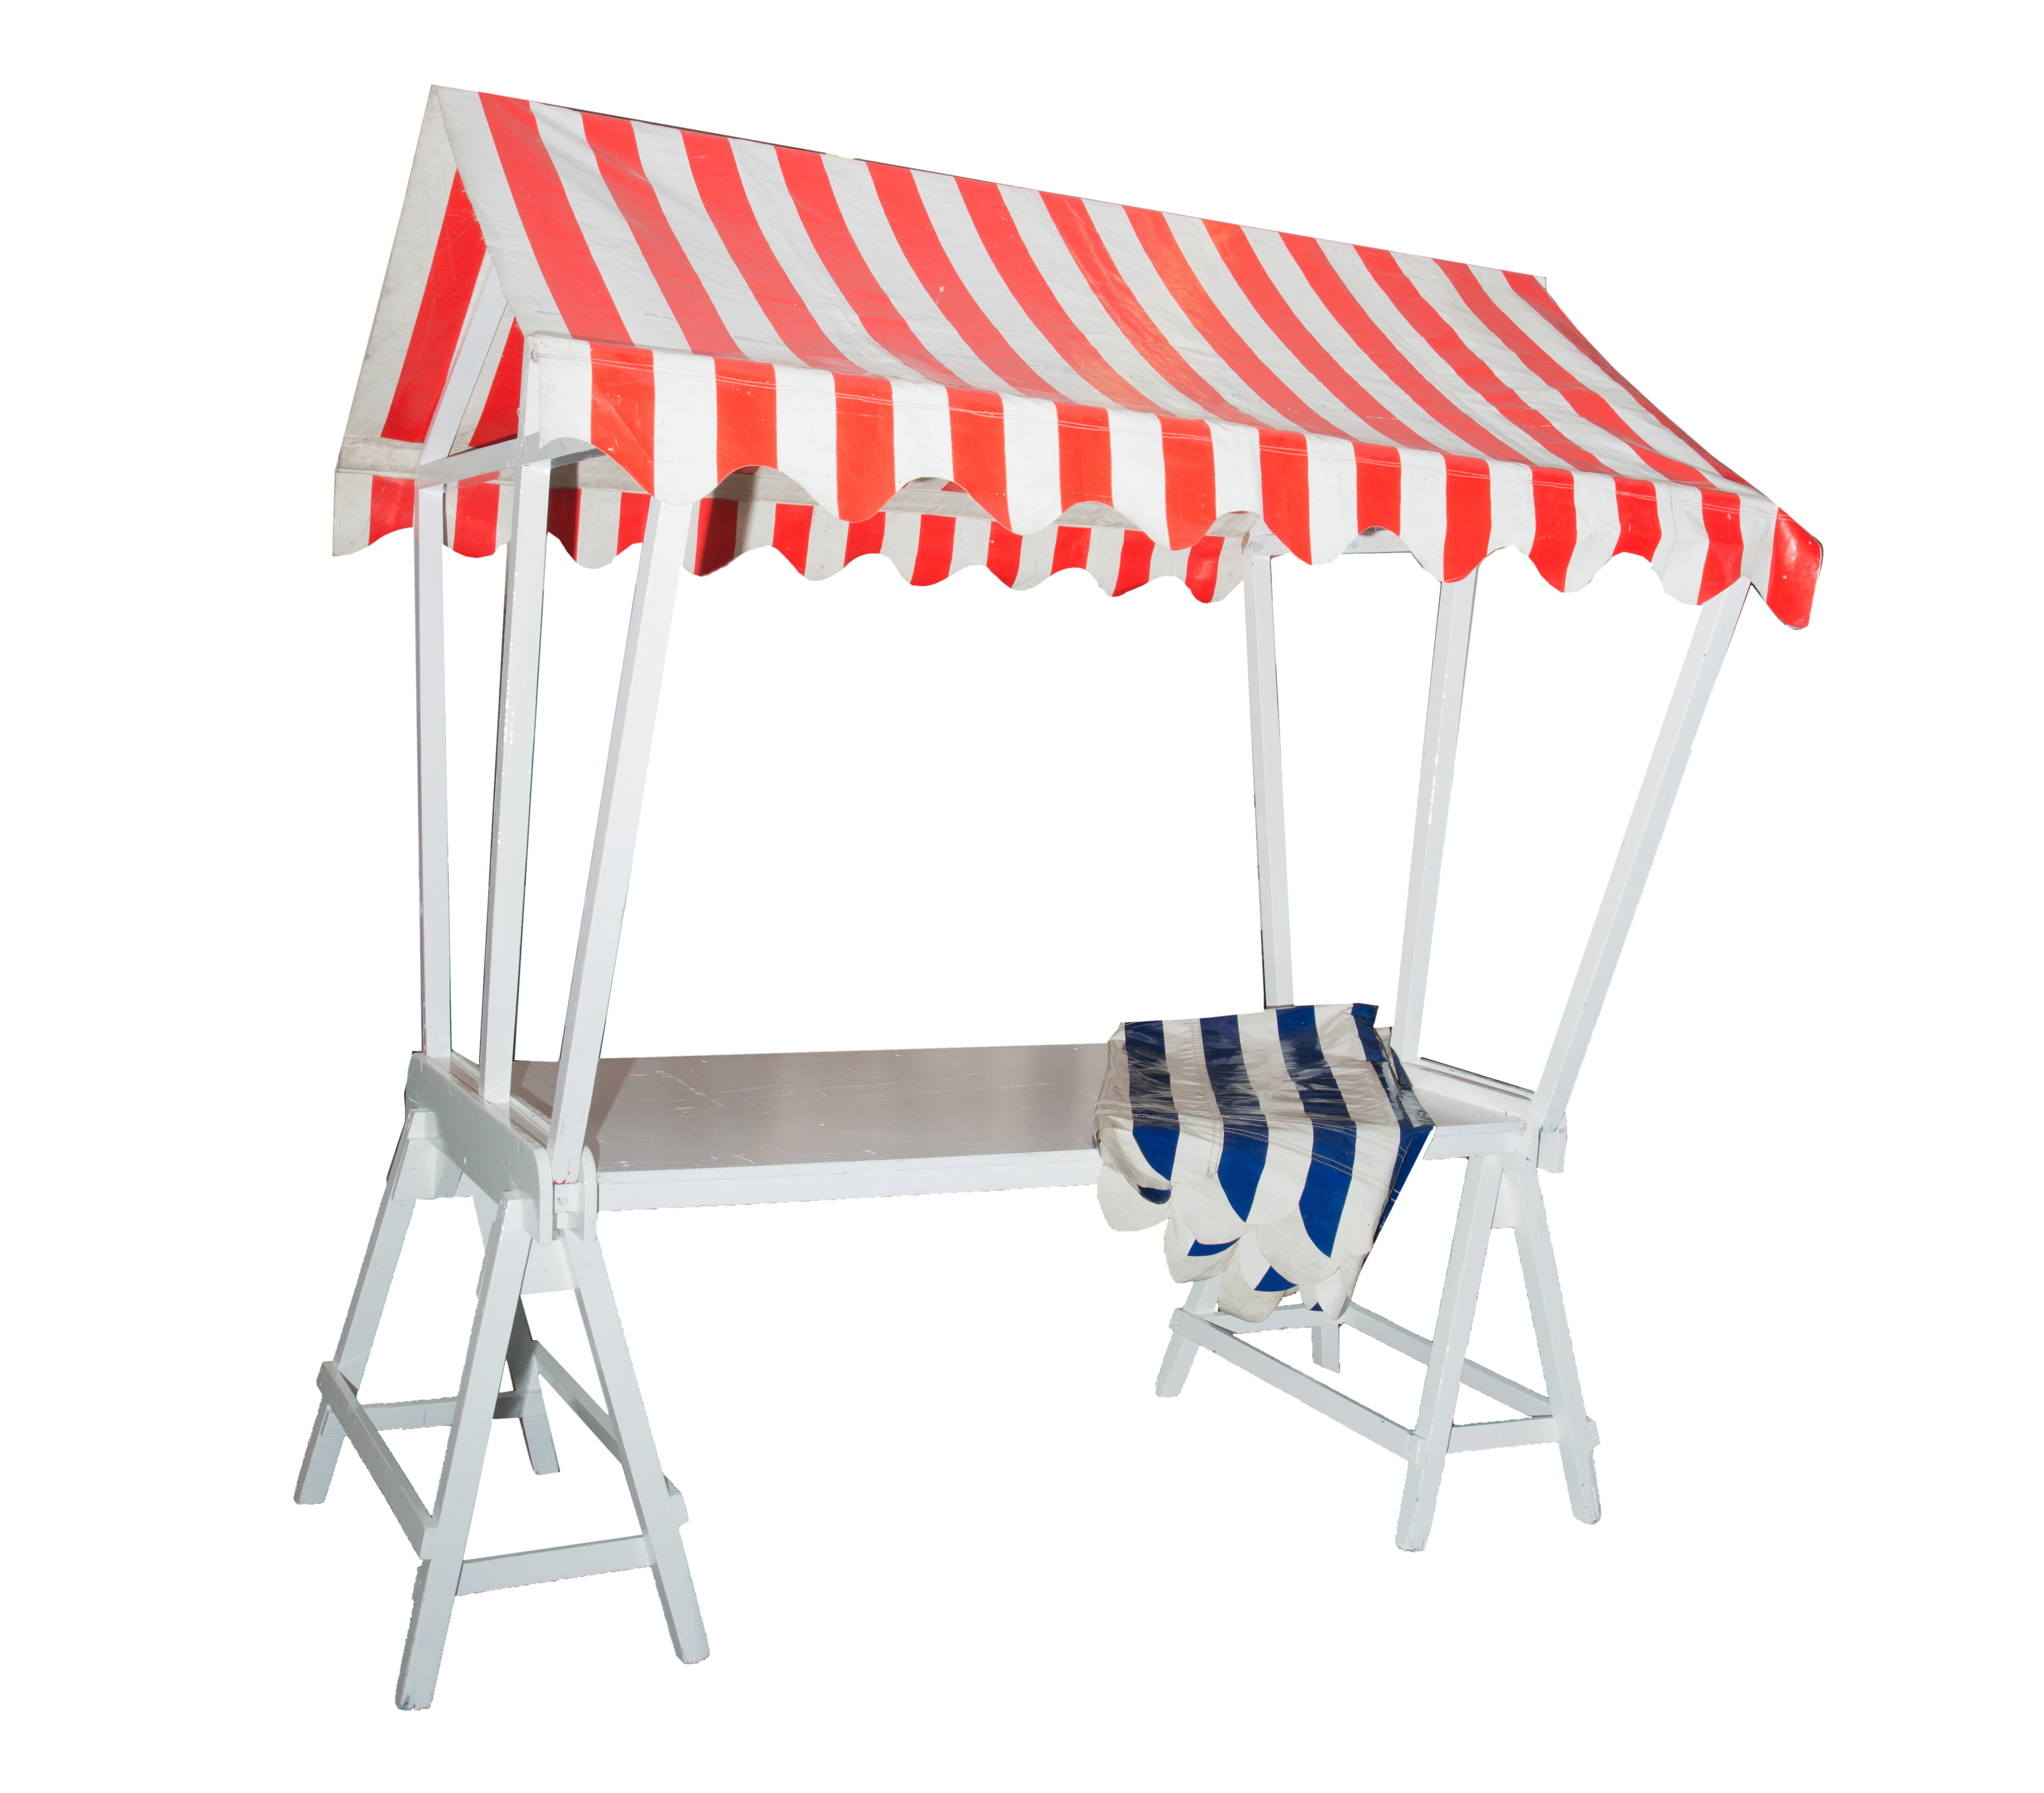 category_FO1305 - Traders Stall with Canopy